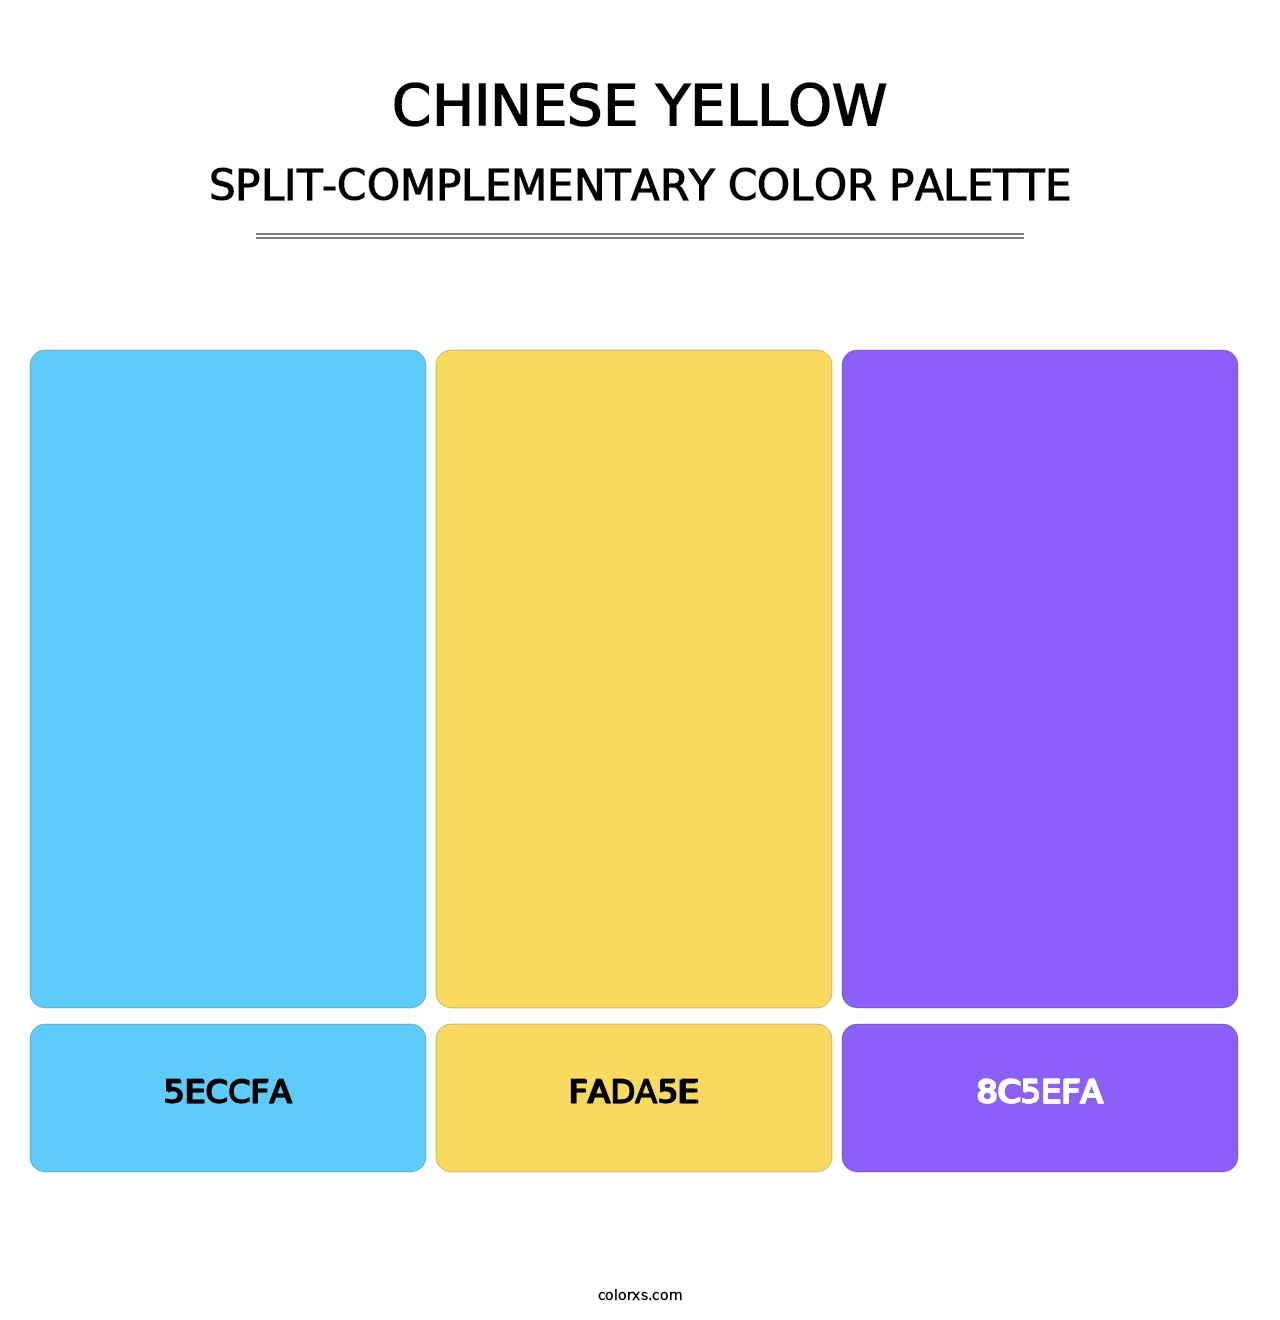 Chinese Yellow - Split-Complementary Color Palette